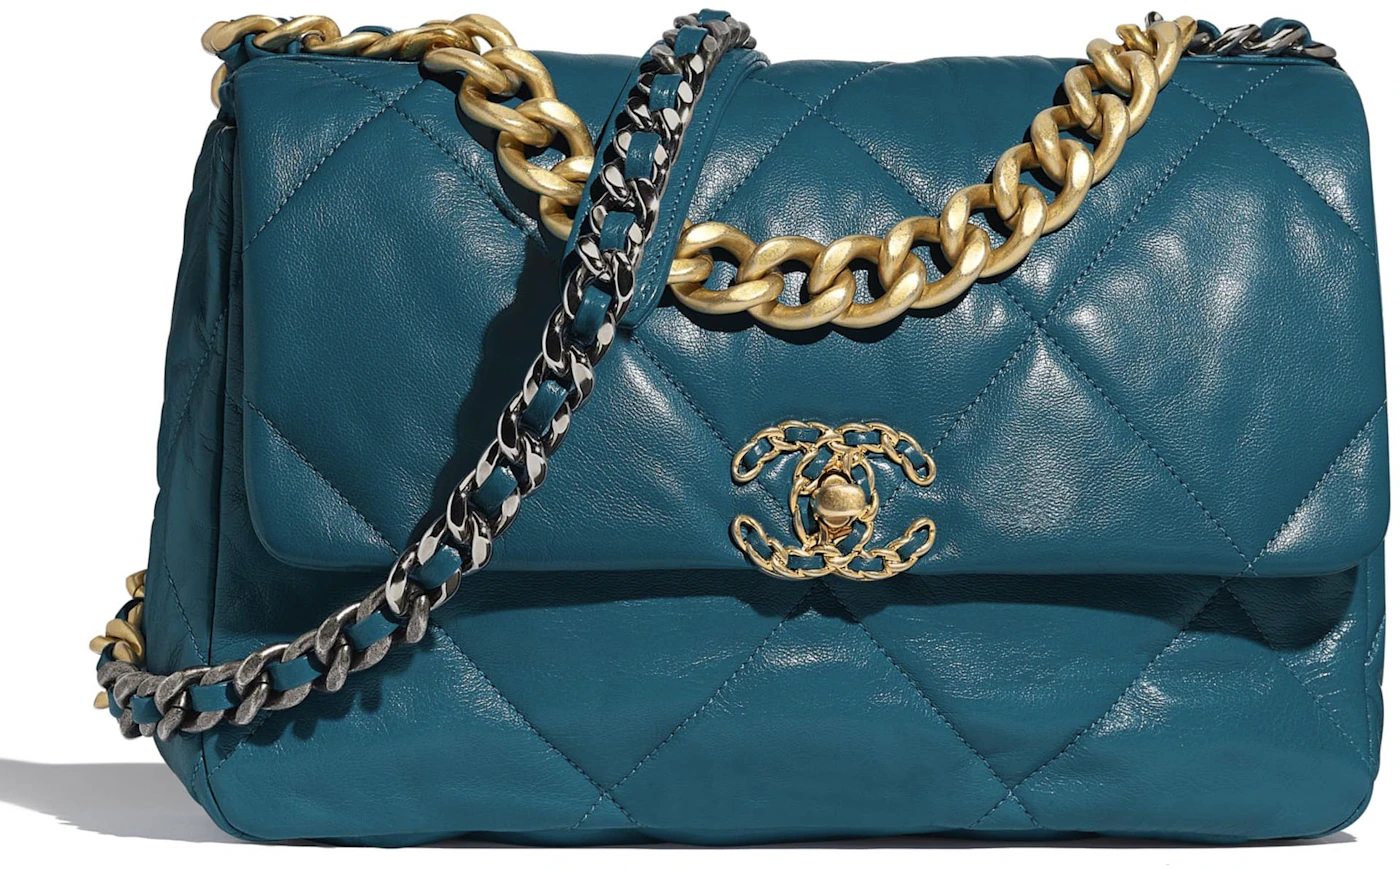 CHANEL Goatskin Quilted Medium Chanel 19 Flap Turquoise 445653